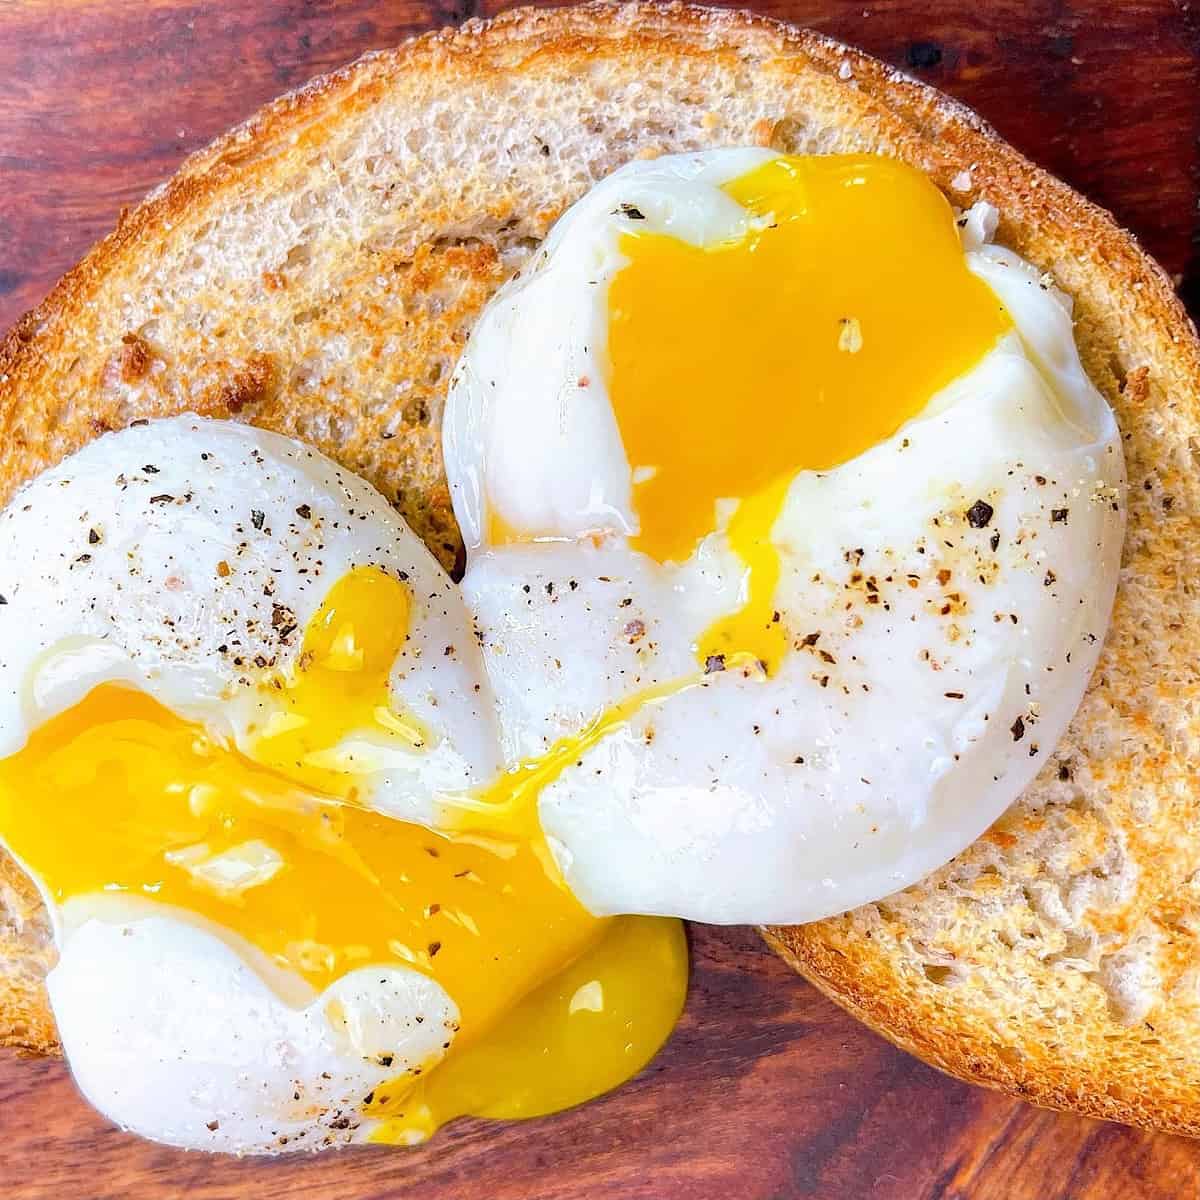 Poached eggs cut open on toast topped with salt and pepper